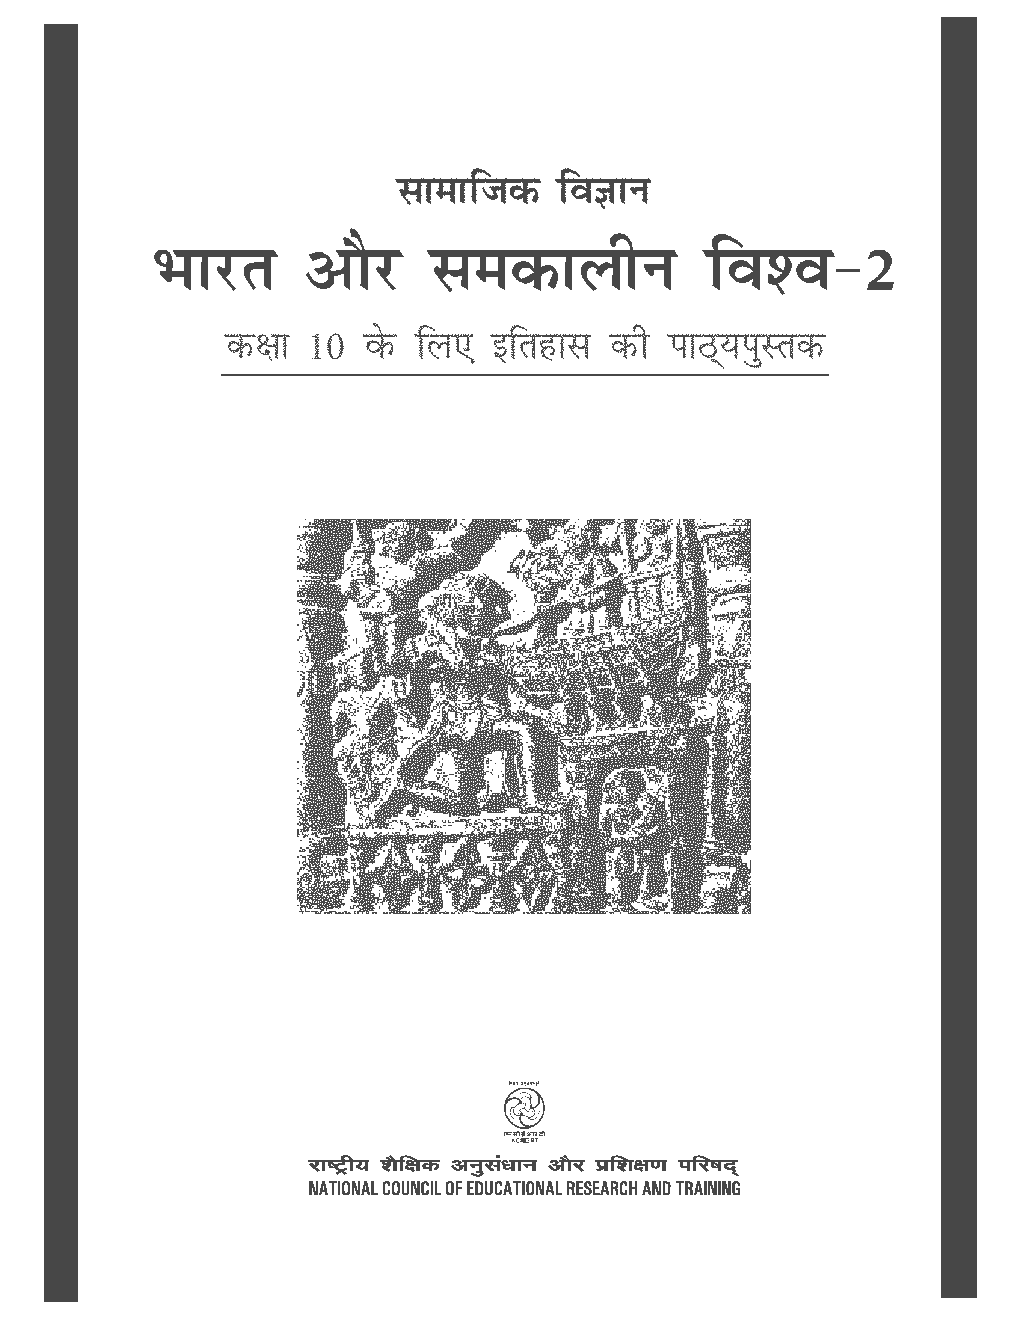 Golden Guide For Class 10 Hindi Pdf Free Download